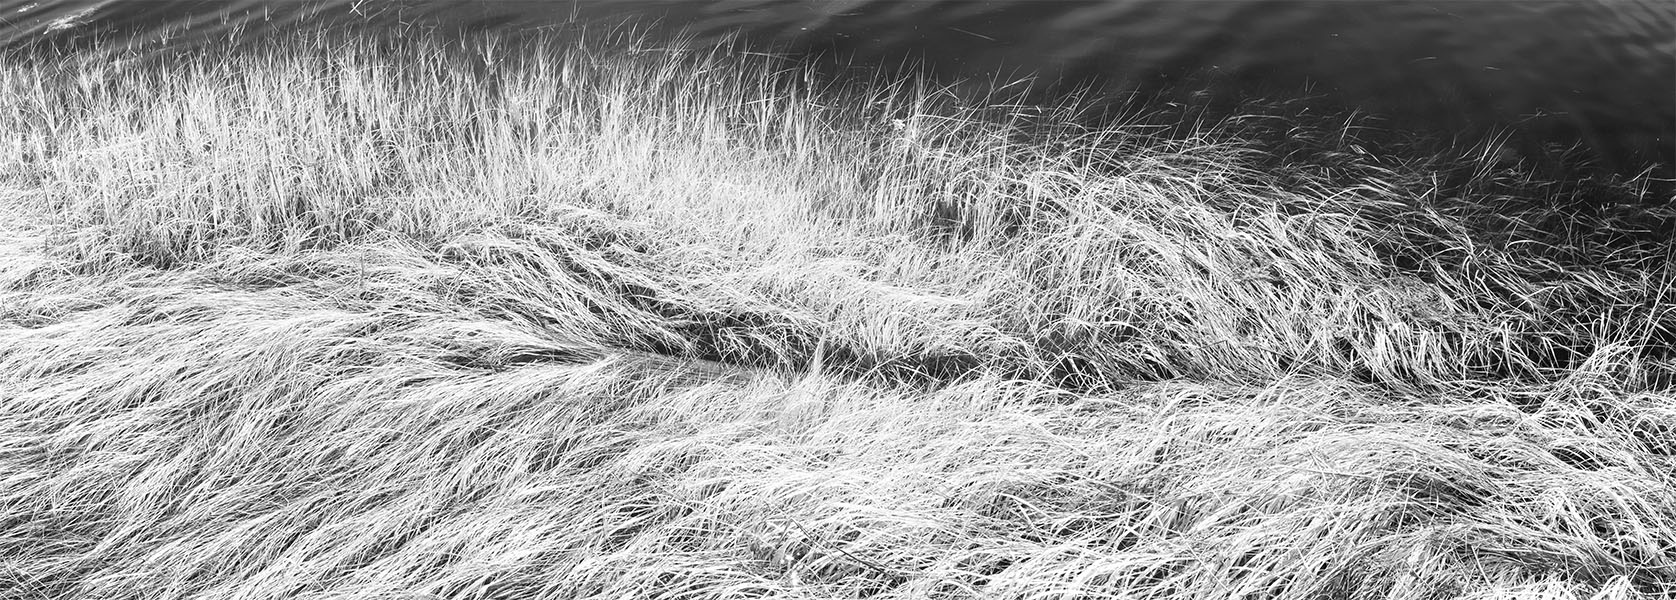 Long Infrared Photo of Sea Grass with Groove.